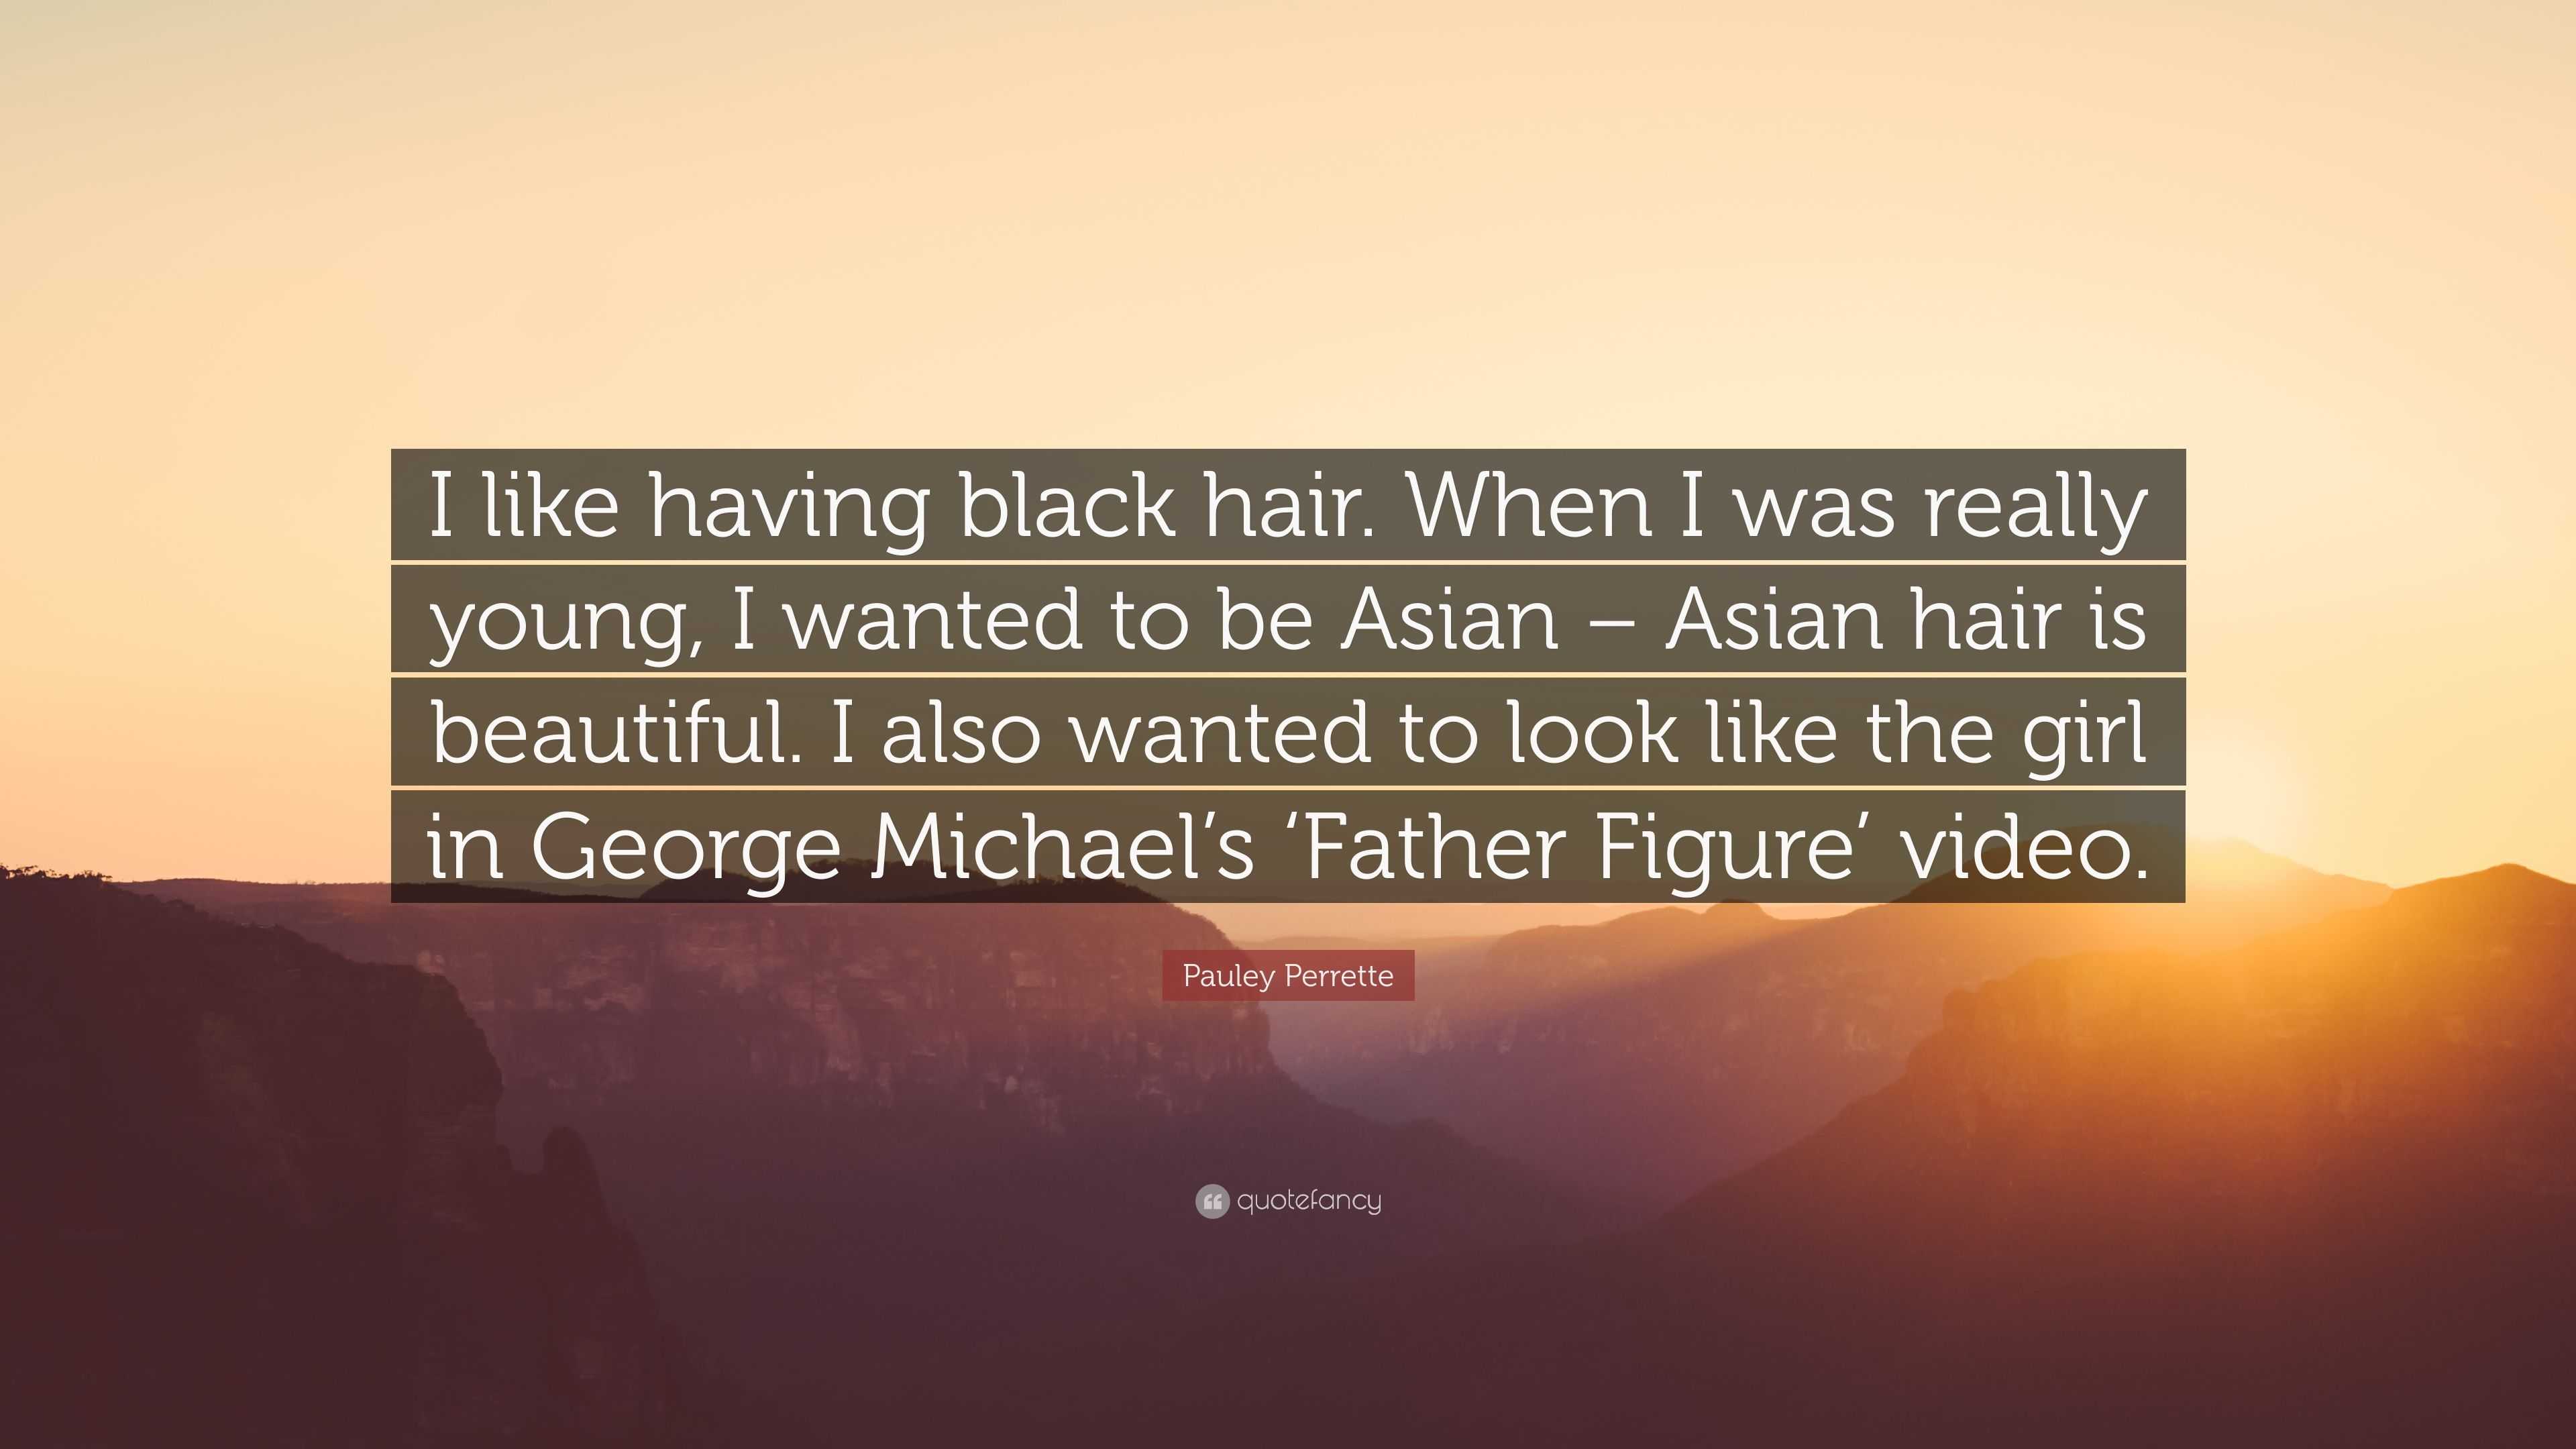 100+ best hair quotes for Instagram to showcase your hairstyle - Tuko.co.ke